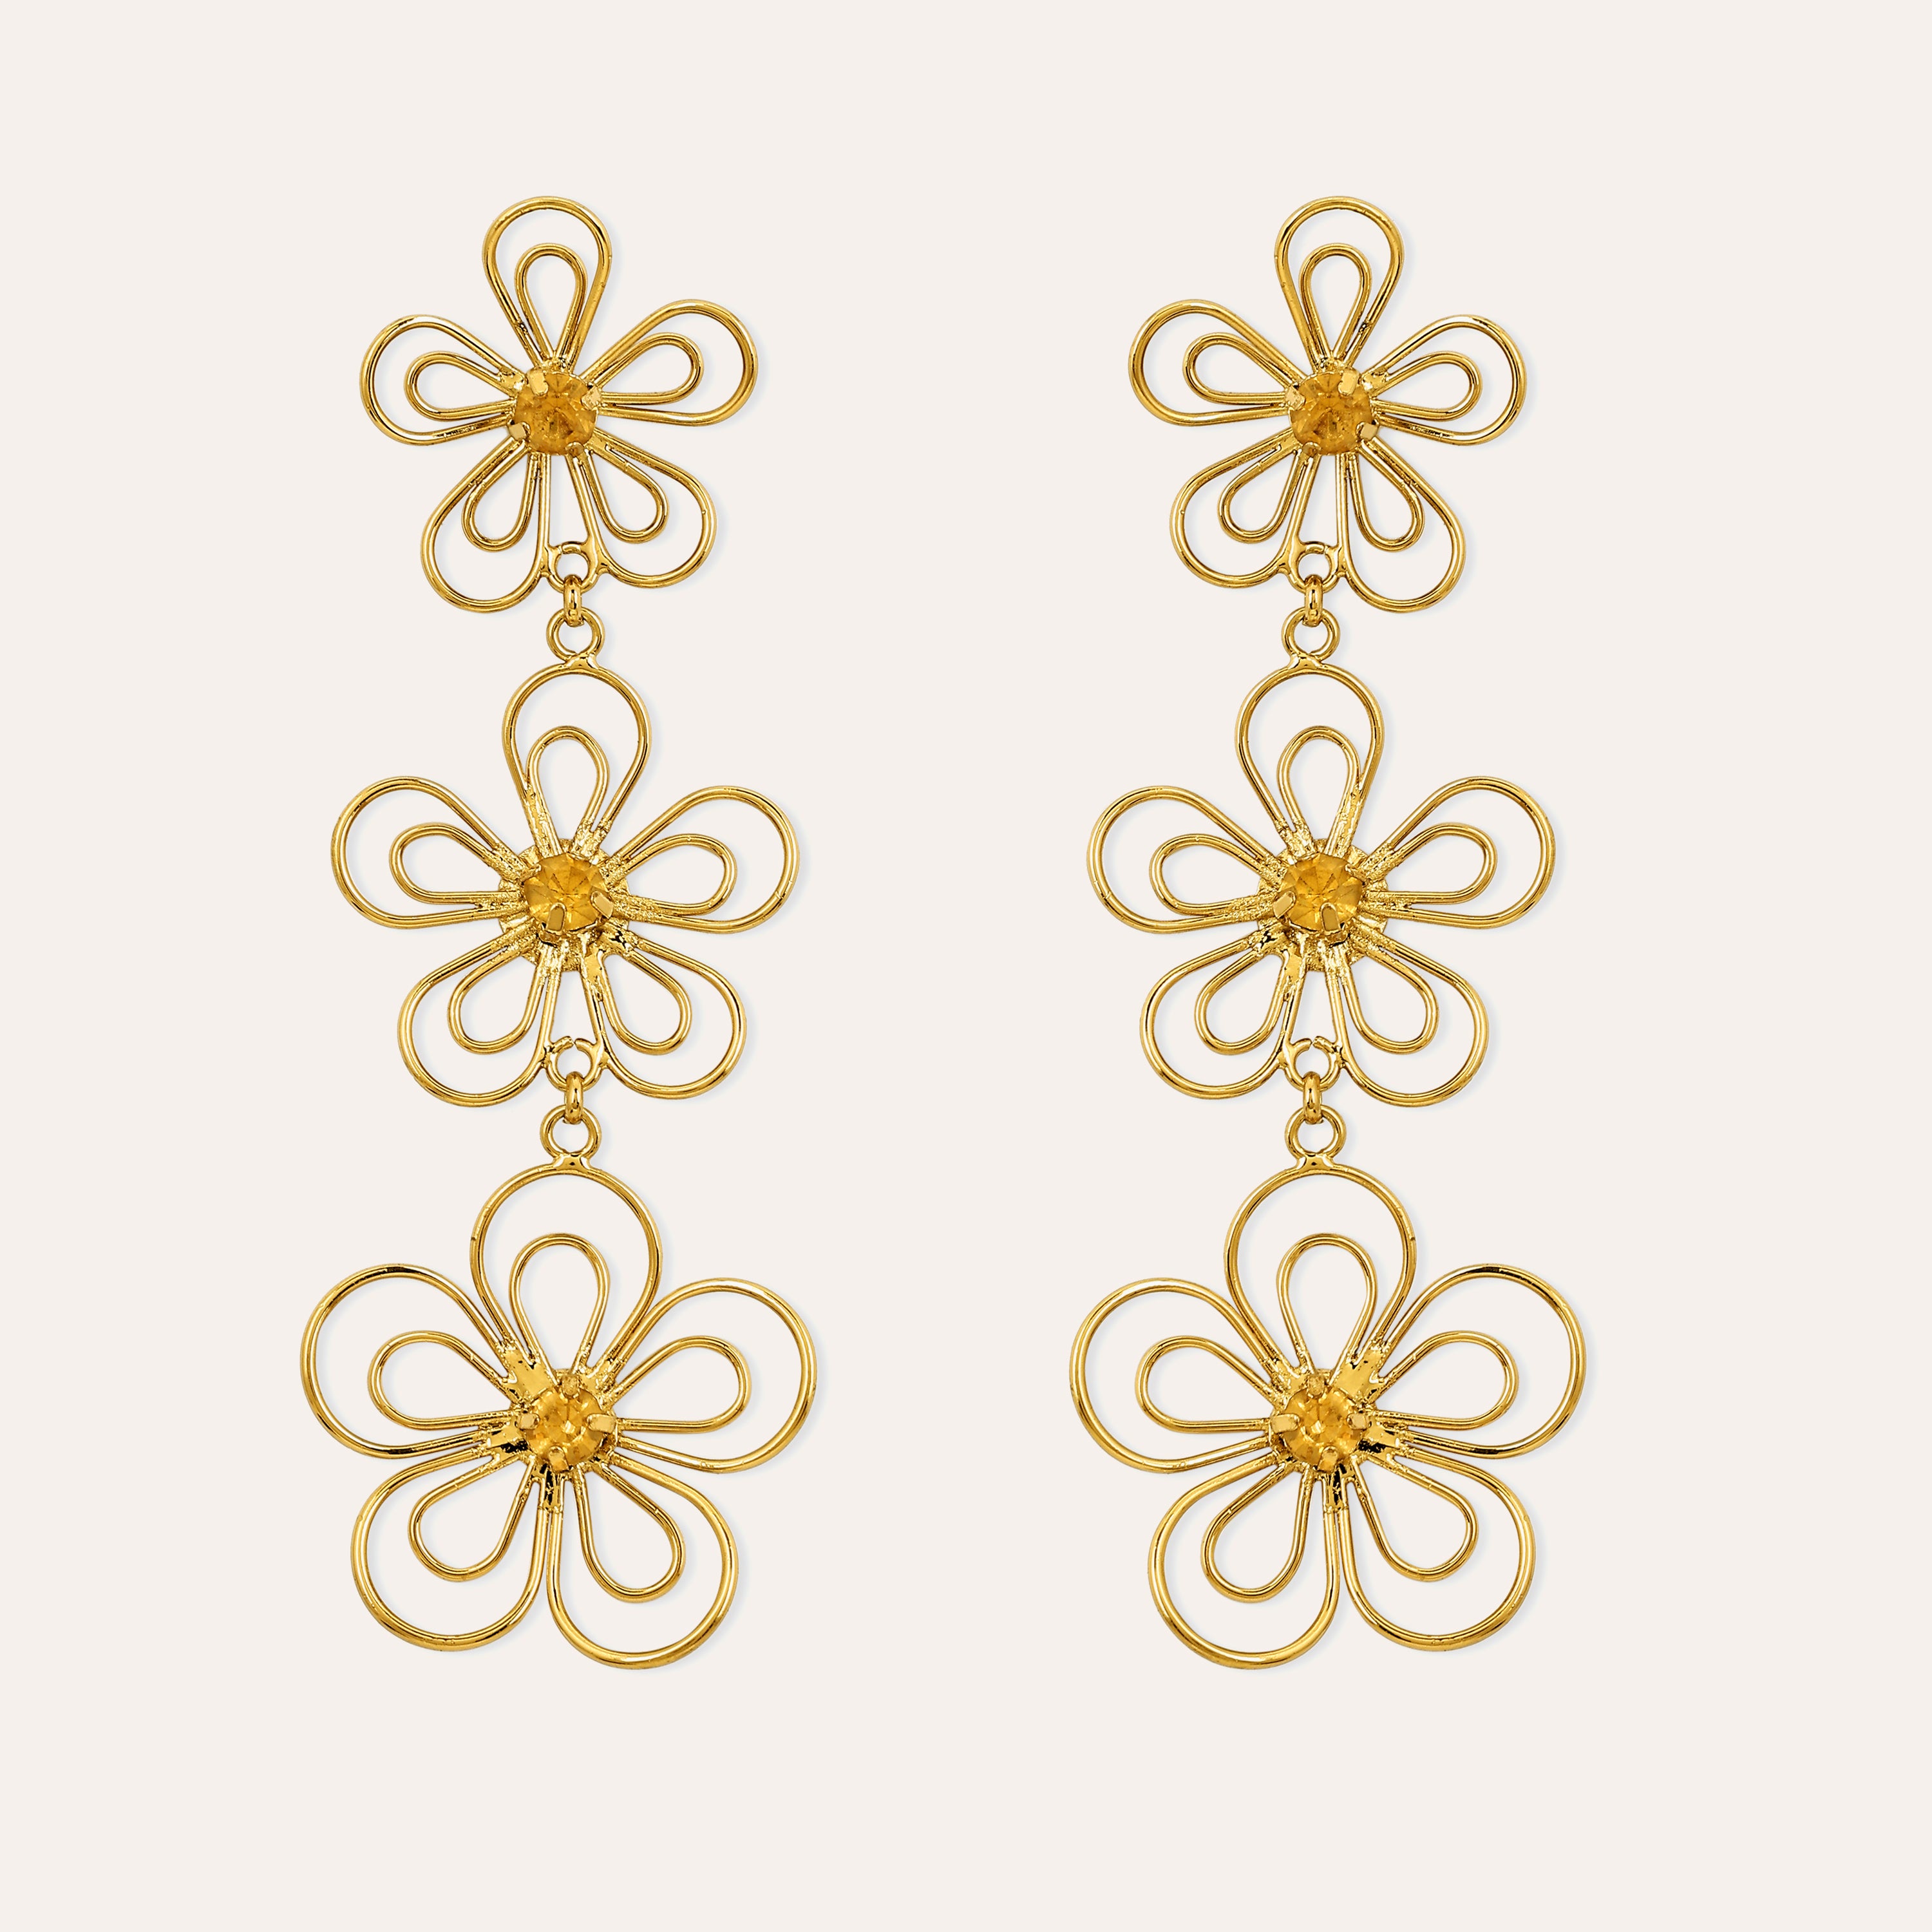 TFC Floral treasures gold plated statement stud earrings-Discover daily wear gold earrings including stud earrings, hoop earrings, and pearl earrings, perfect as earrings for women and earrings for girls.Find the cheapest fashion jewellery which is anti-tarnish only at The Fun company